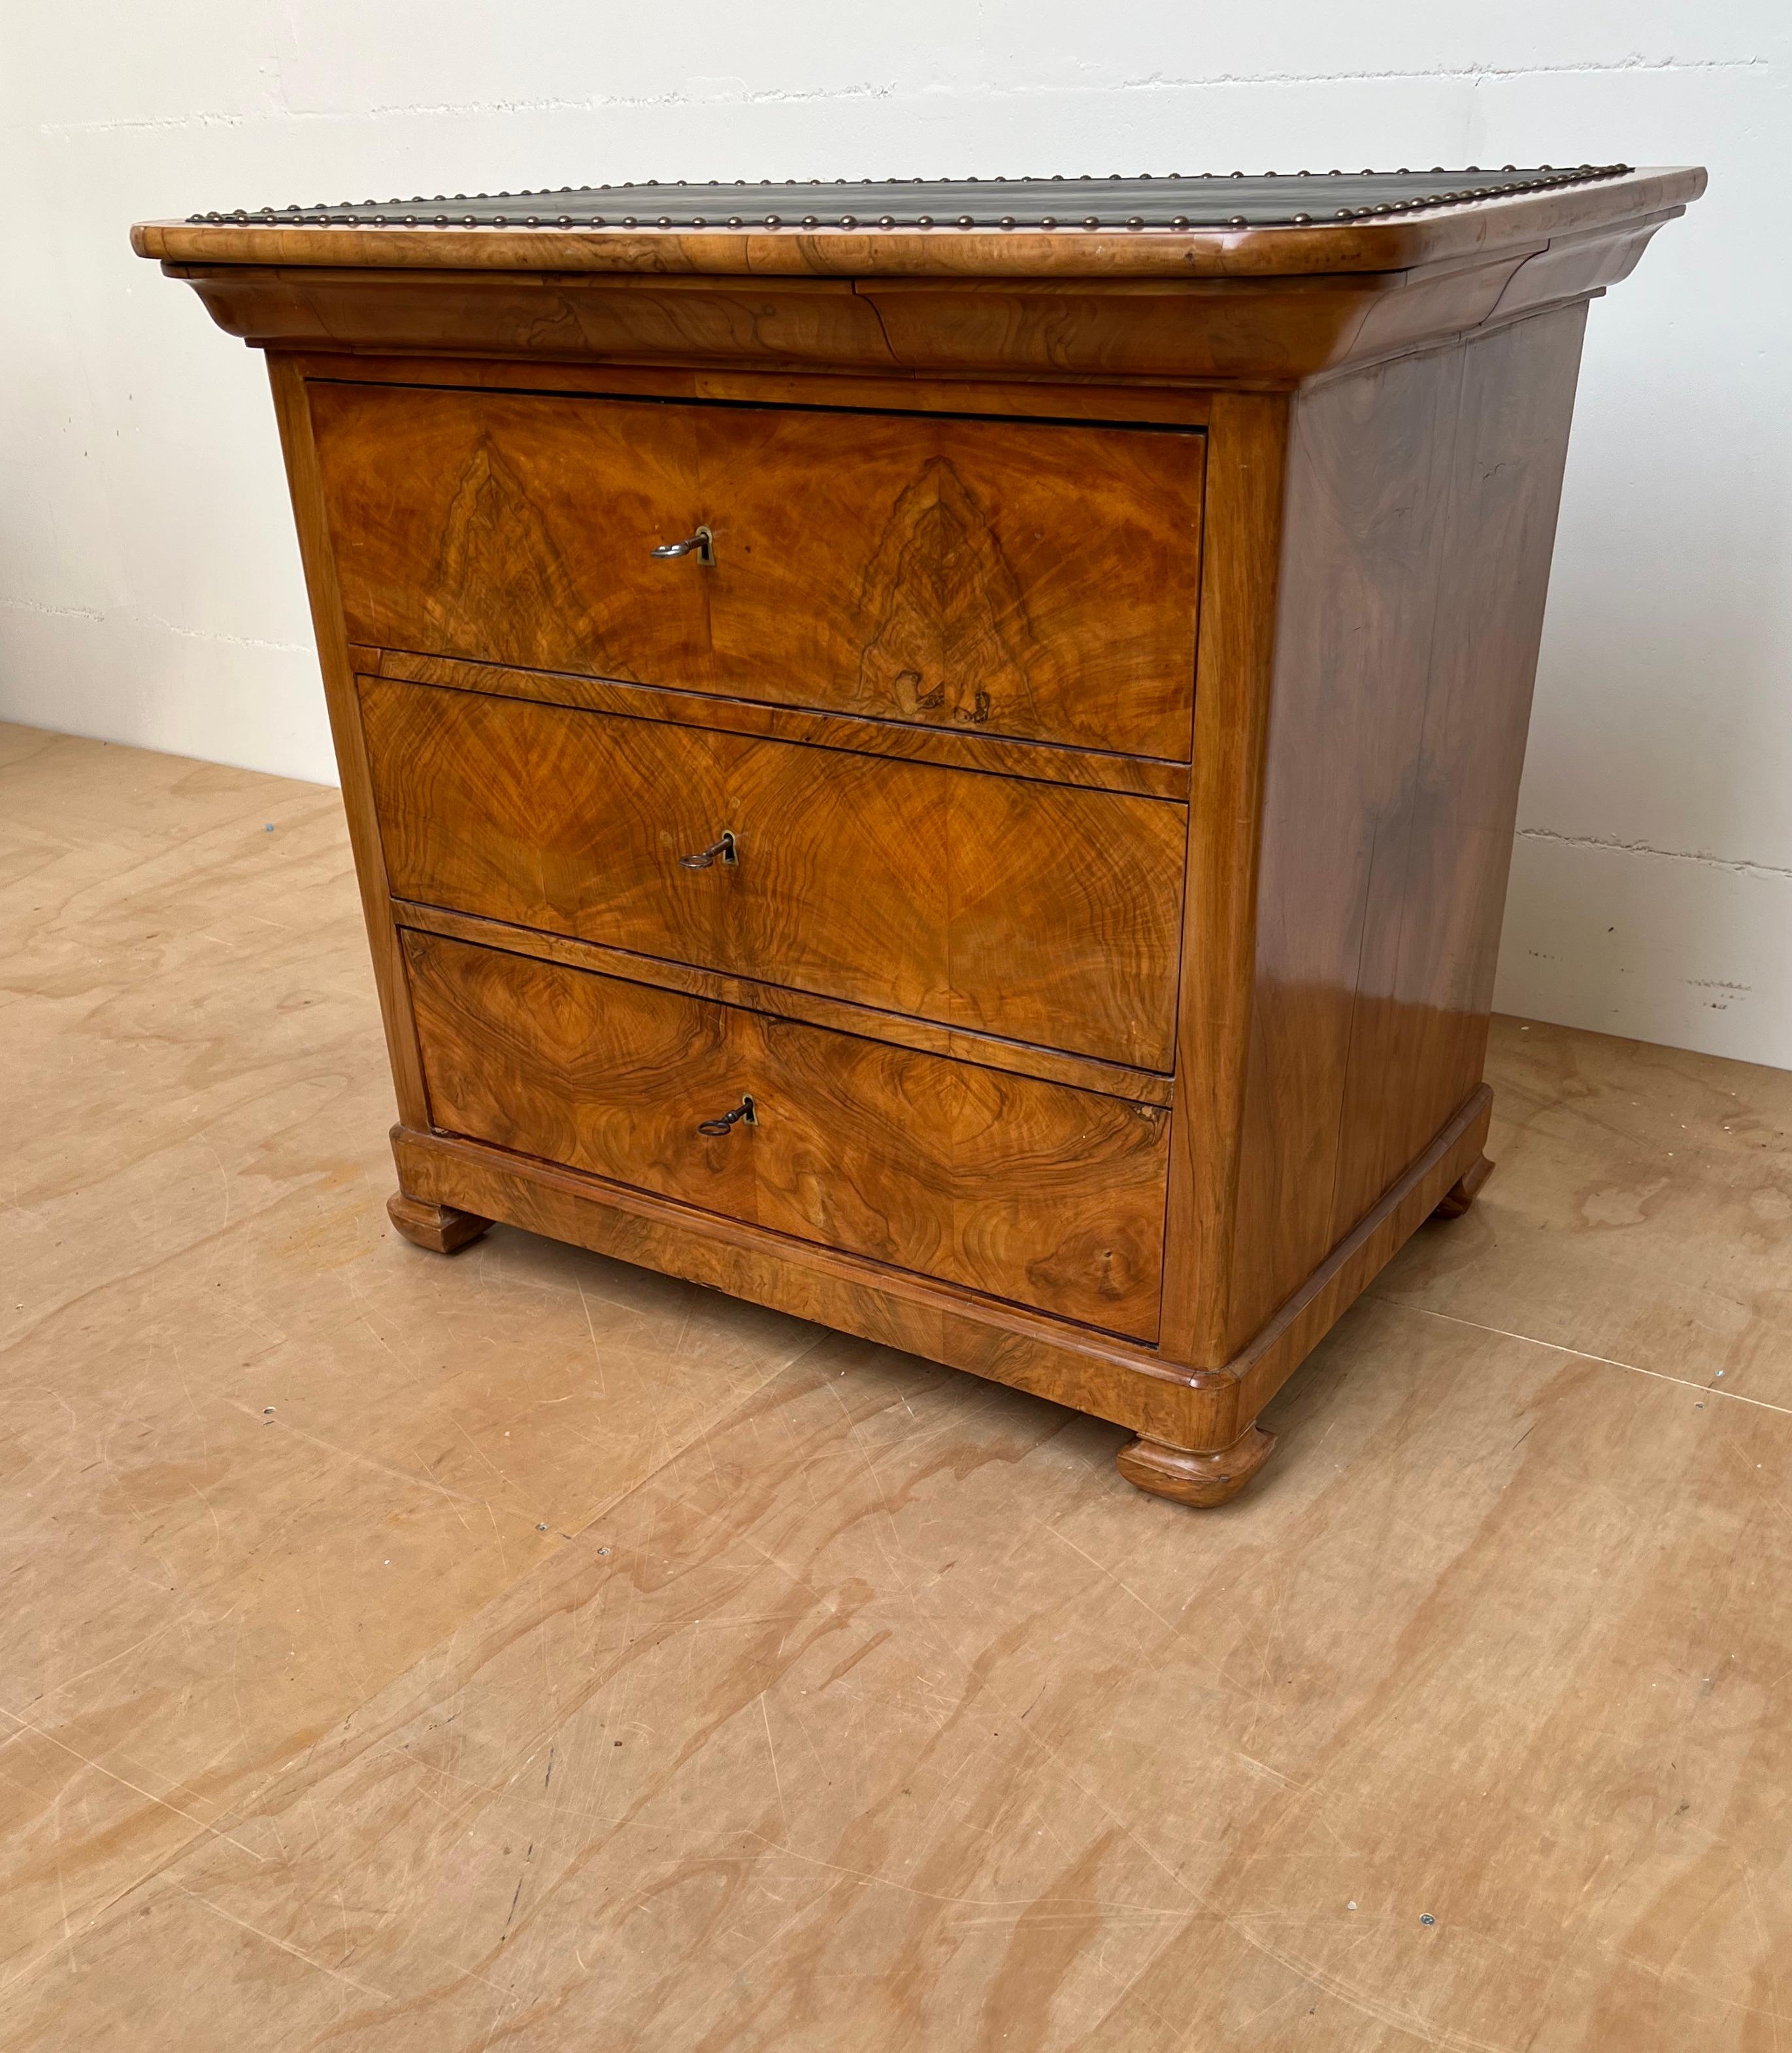 Extraordinary walnut veneered architects drawing table and chest of drawers into one.

This amazing quality and excellent condition chest and drawing table was handcrafted in the 19th century. In all our years of selling rare antiques we have never